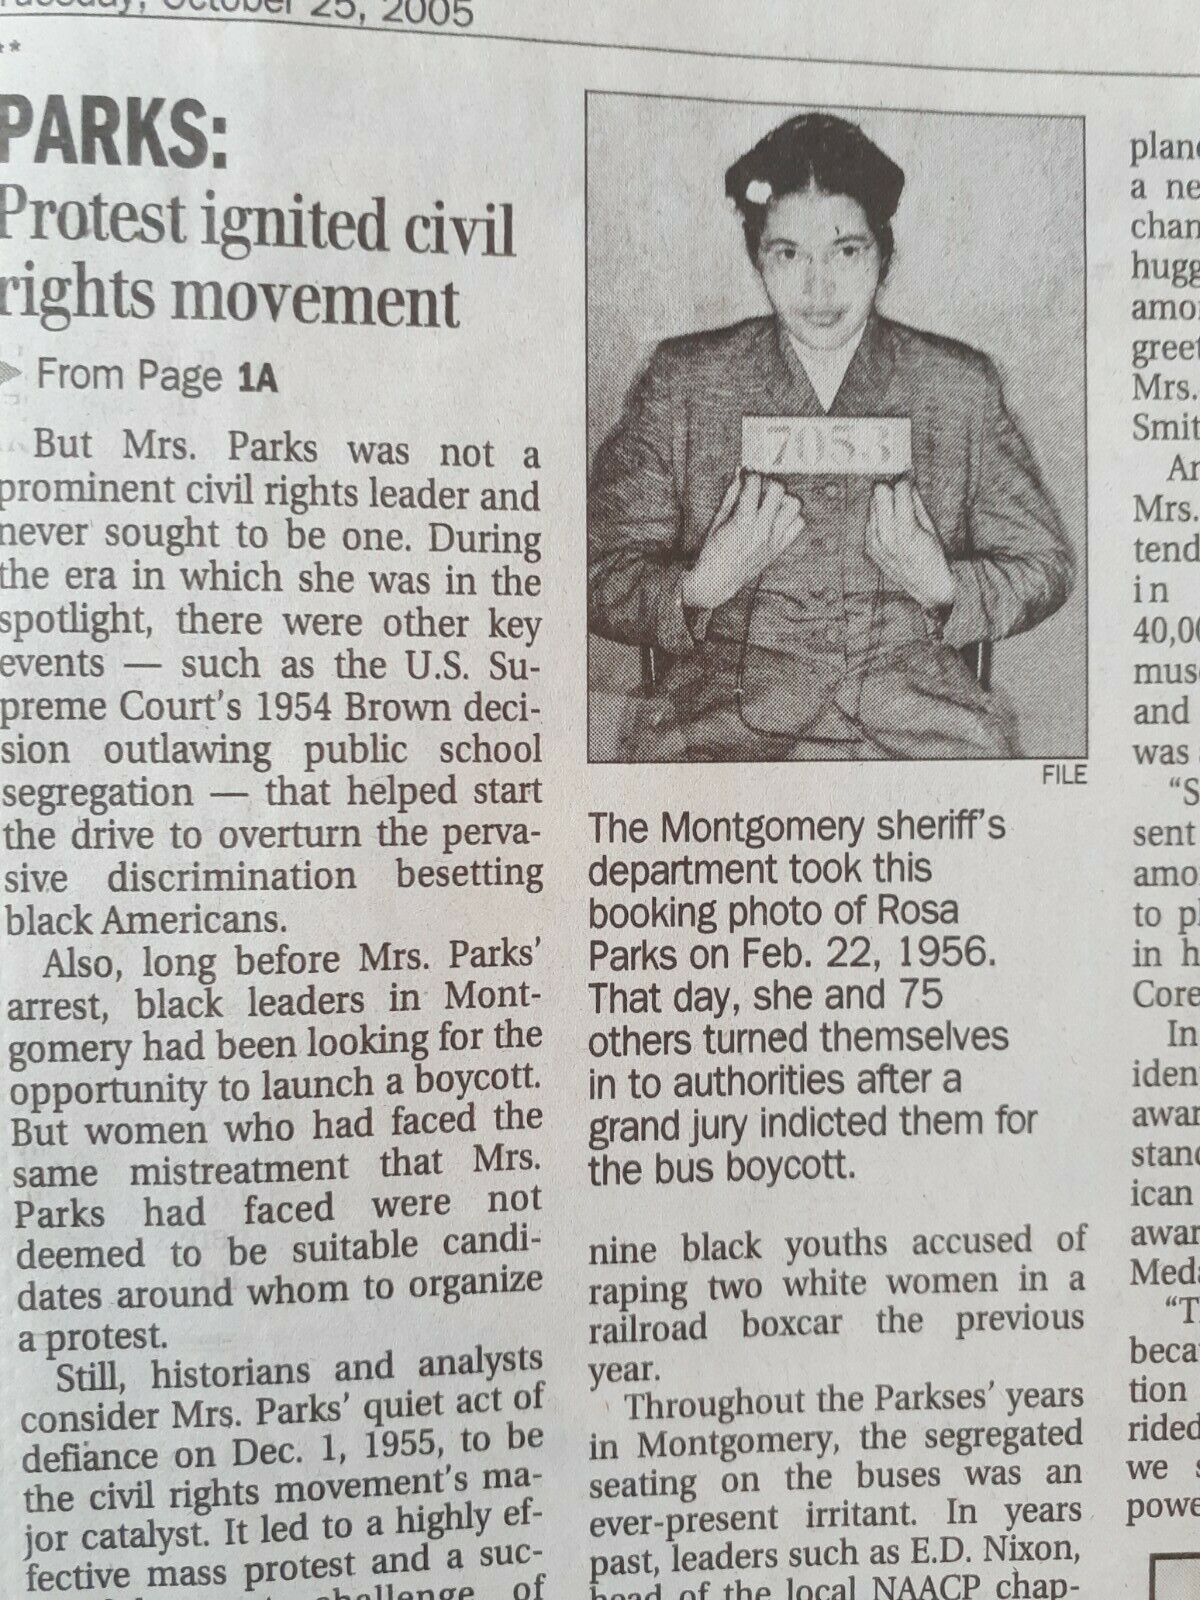 Newspapers- ROSA PARKS: CIVIL RIGHTS AND HUMAN RIGHTS ICON DIES,BIRMINGHAM PAPER